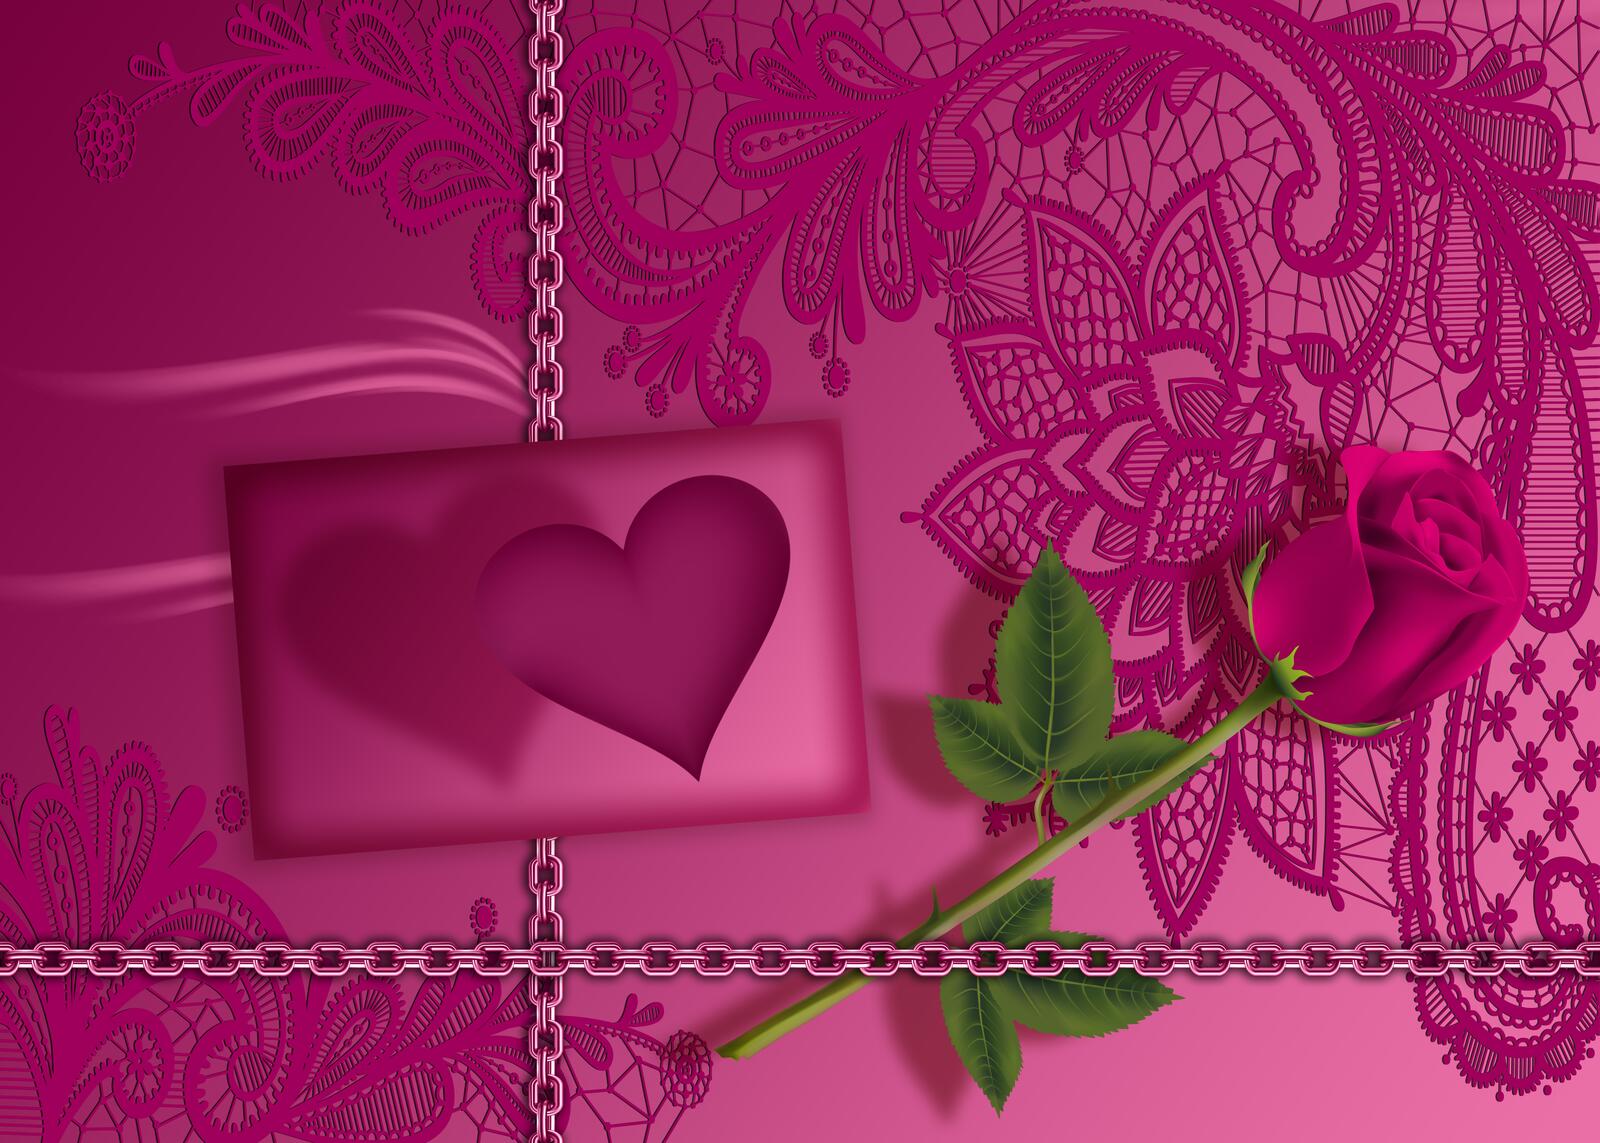 Wallpapers Valentine Love You Rose on the desktop